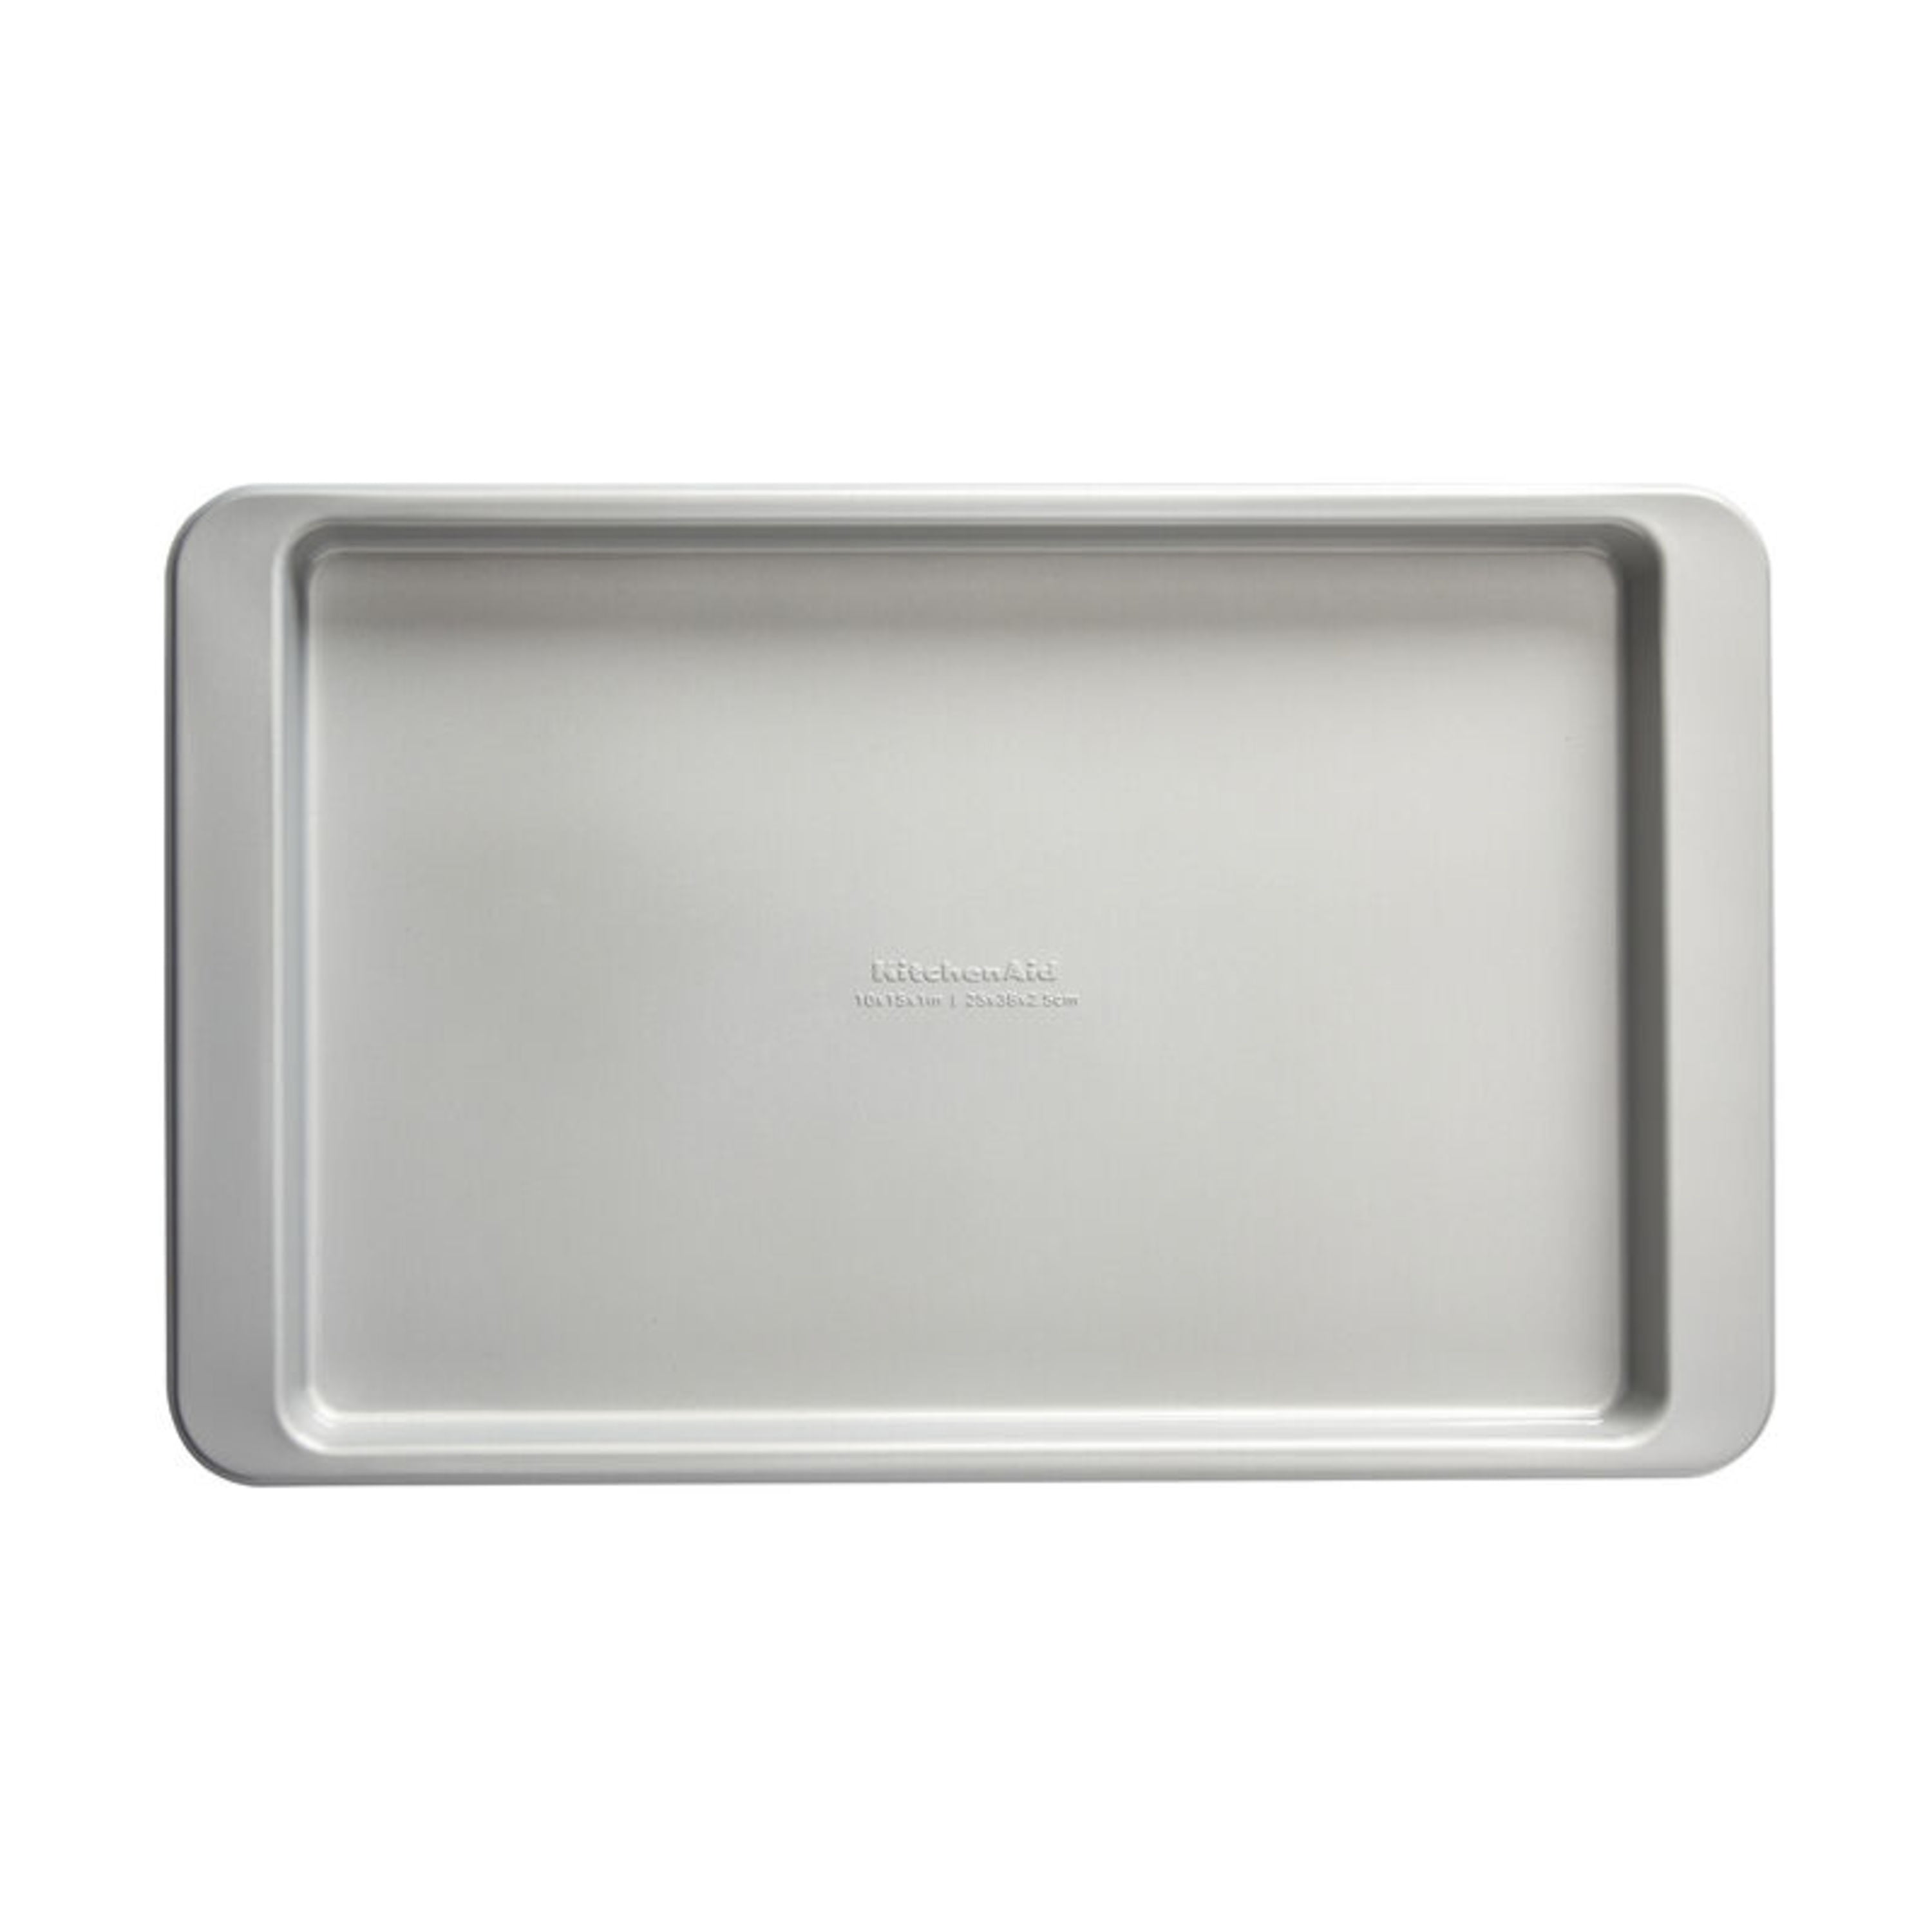 KitchenAid Nonstick 10 x 15 in Baking Sheet with Extended Handles for Easy  Grip, Aluminized Steel to Promoted Even Baking, Dishashwer Safe,Contour